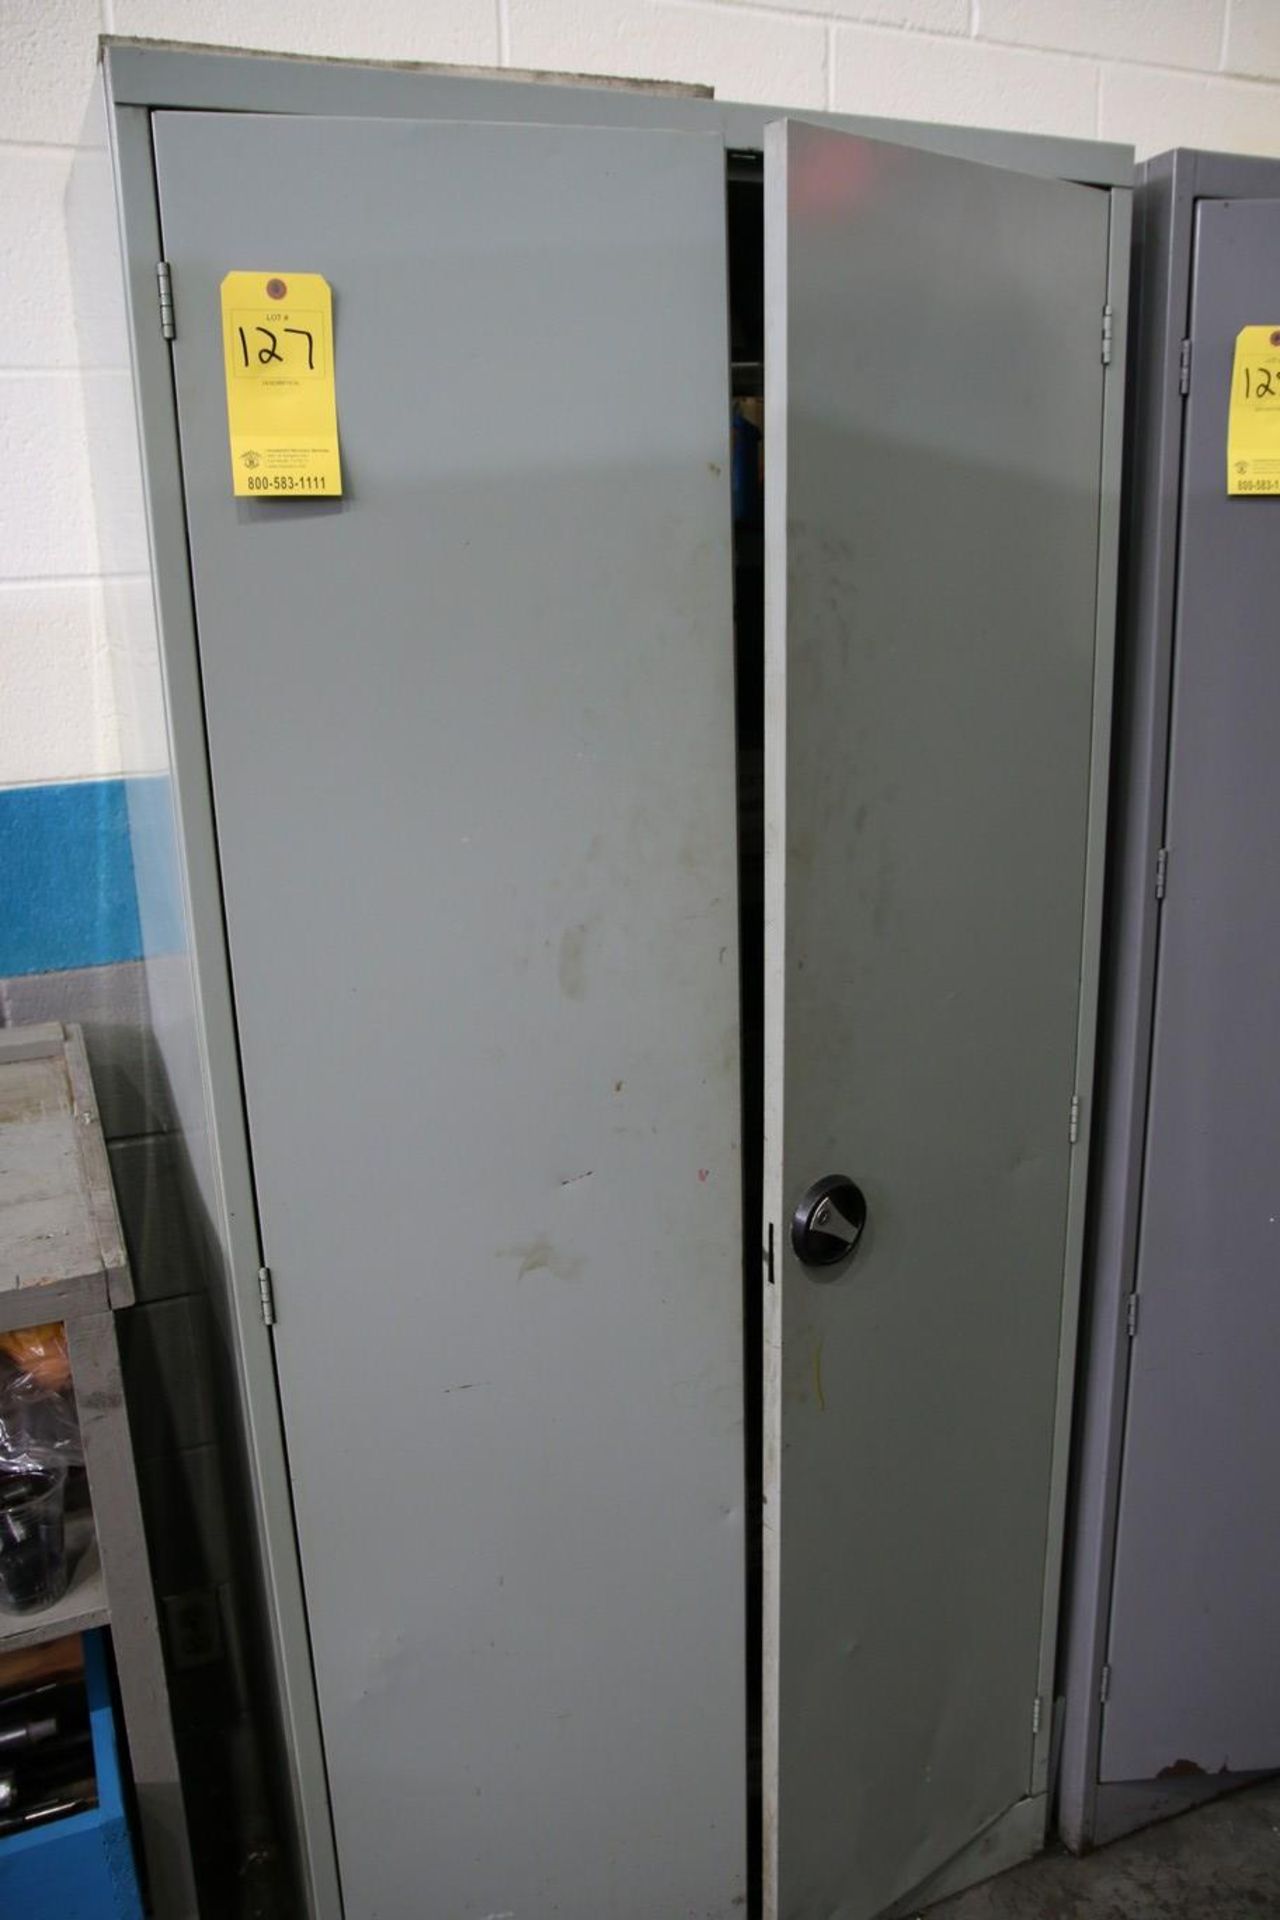 2-Door Cabinet with Contents Contents Include Reamers, Taps, Drills and Other Misc. Items